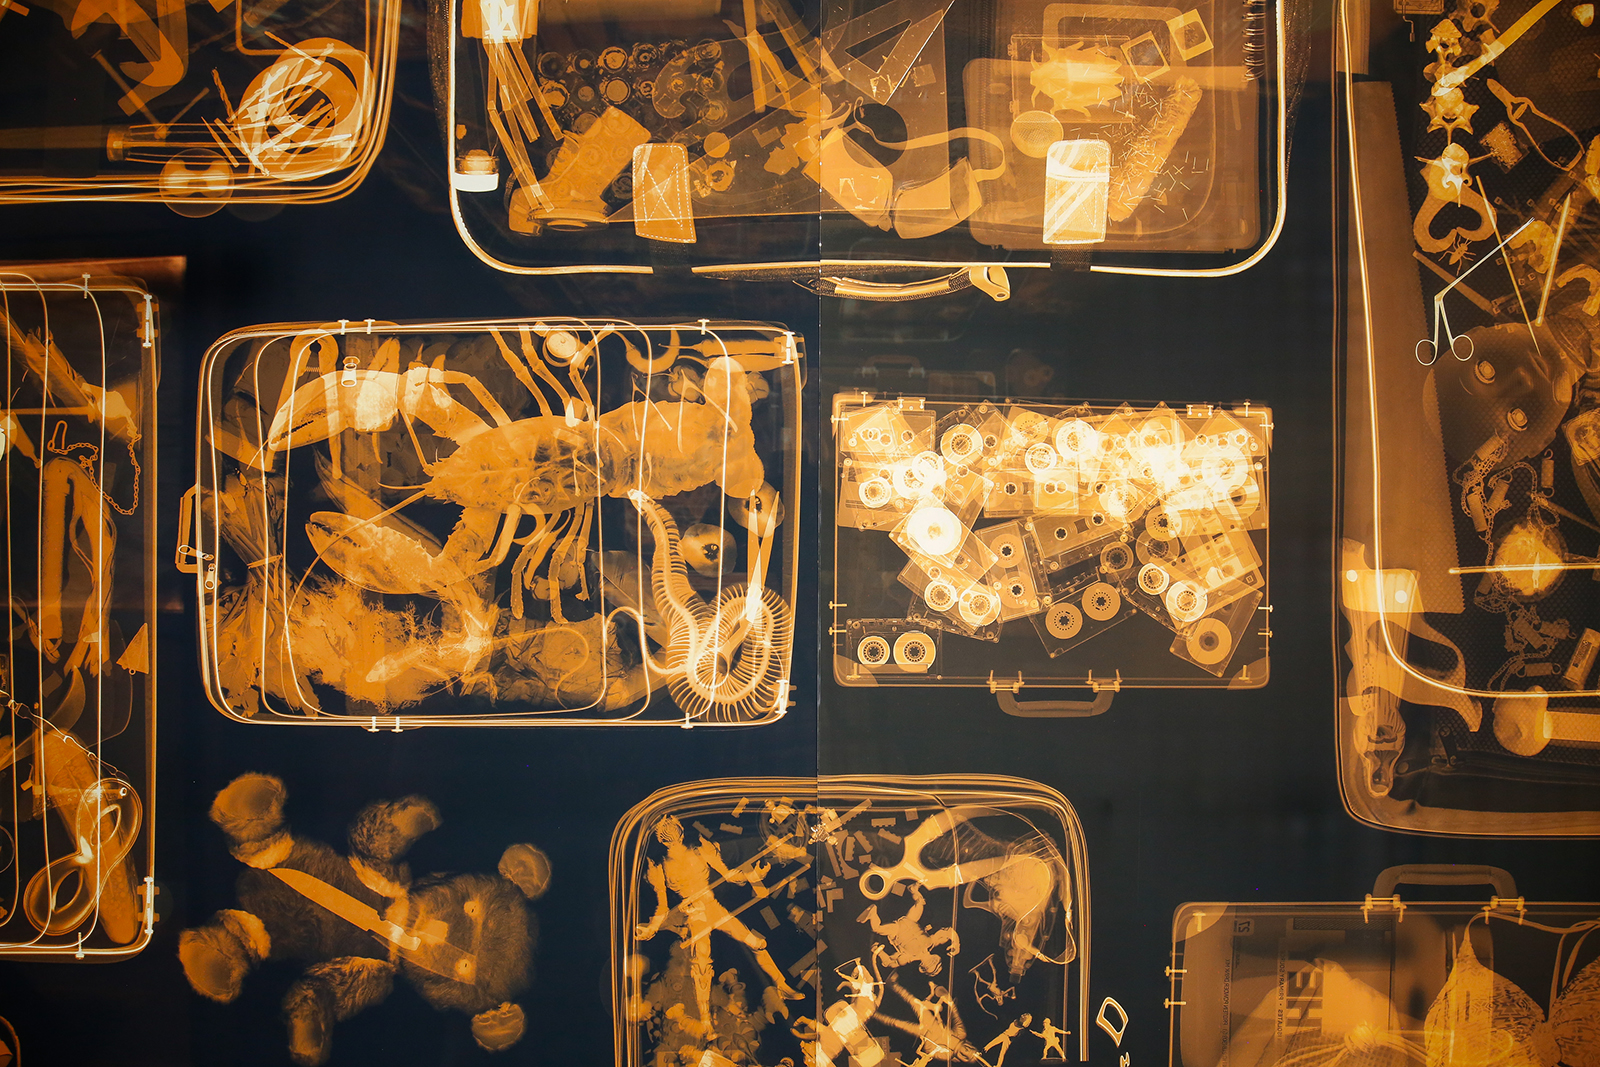 Detail of a backlit mural of x-rayed luggage, revealing surprising contents like a briefcase full of cassette tapes, a teddy bear with a knife inside, a suitcase full of sea creatures, and another full of kids toys.